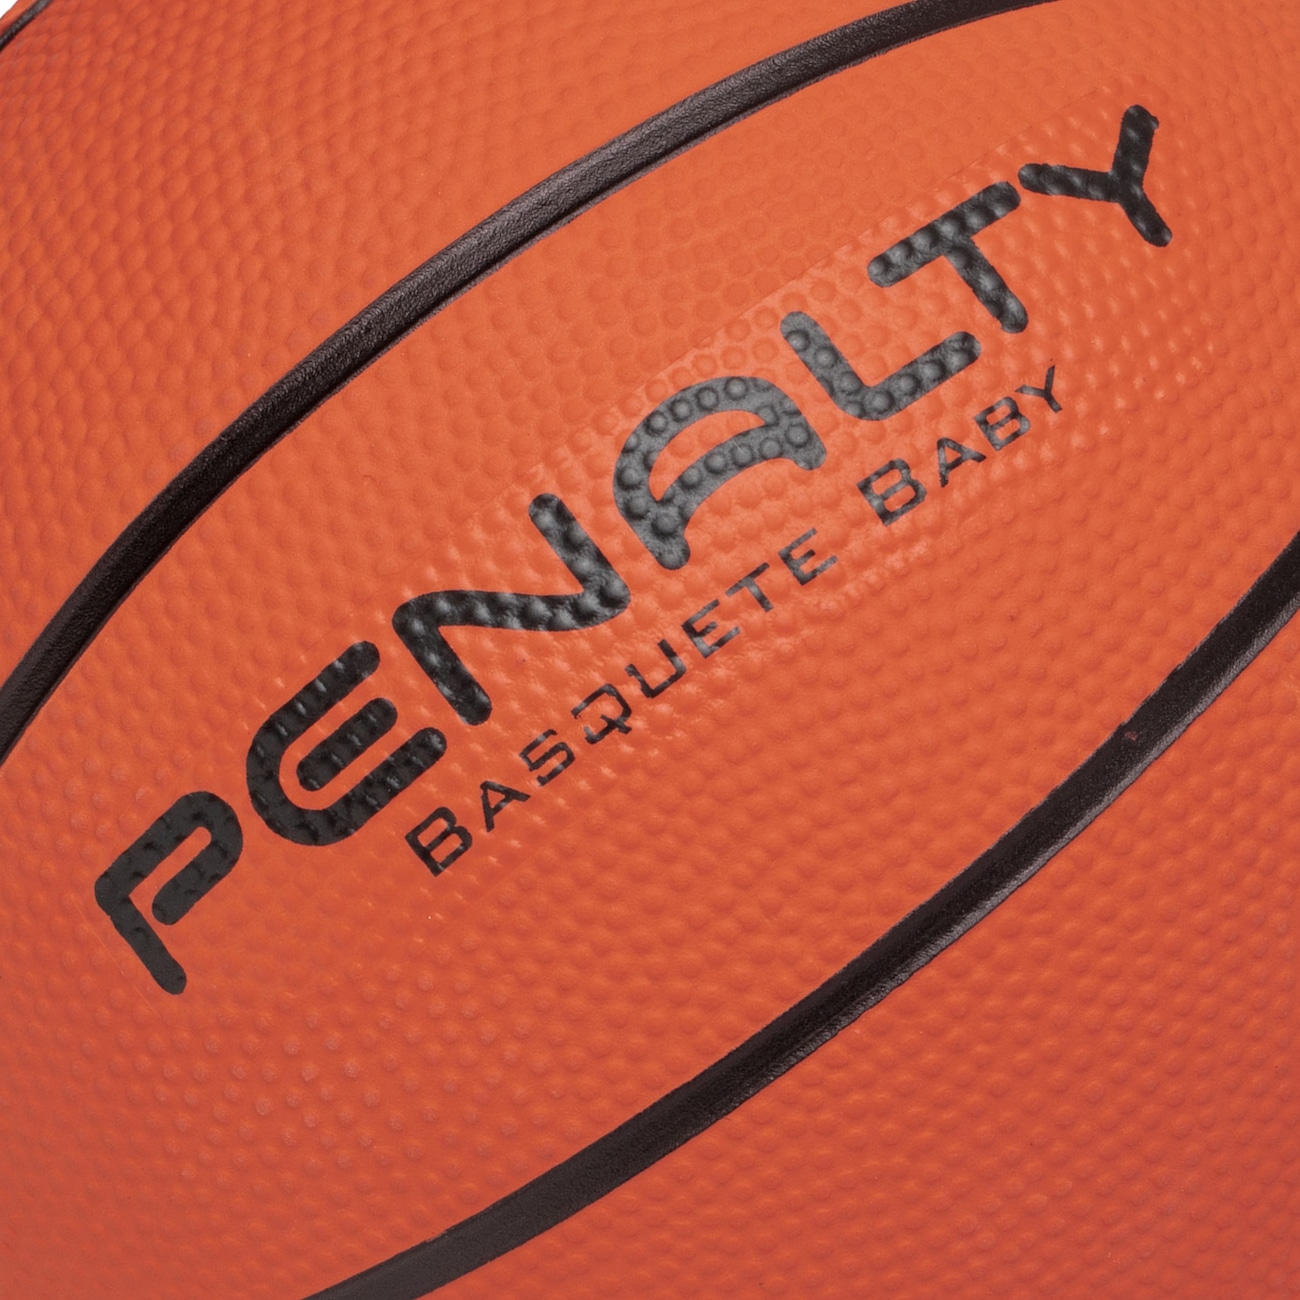 Bola Basquete Penalty Playoff Baby ix - Penalty